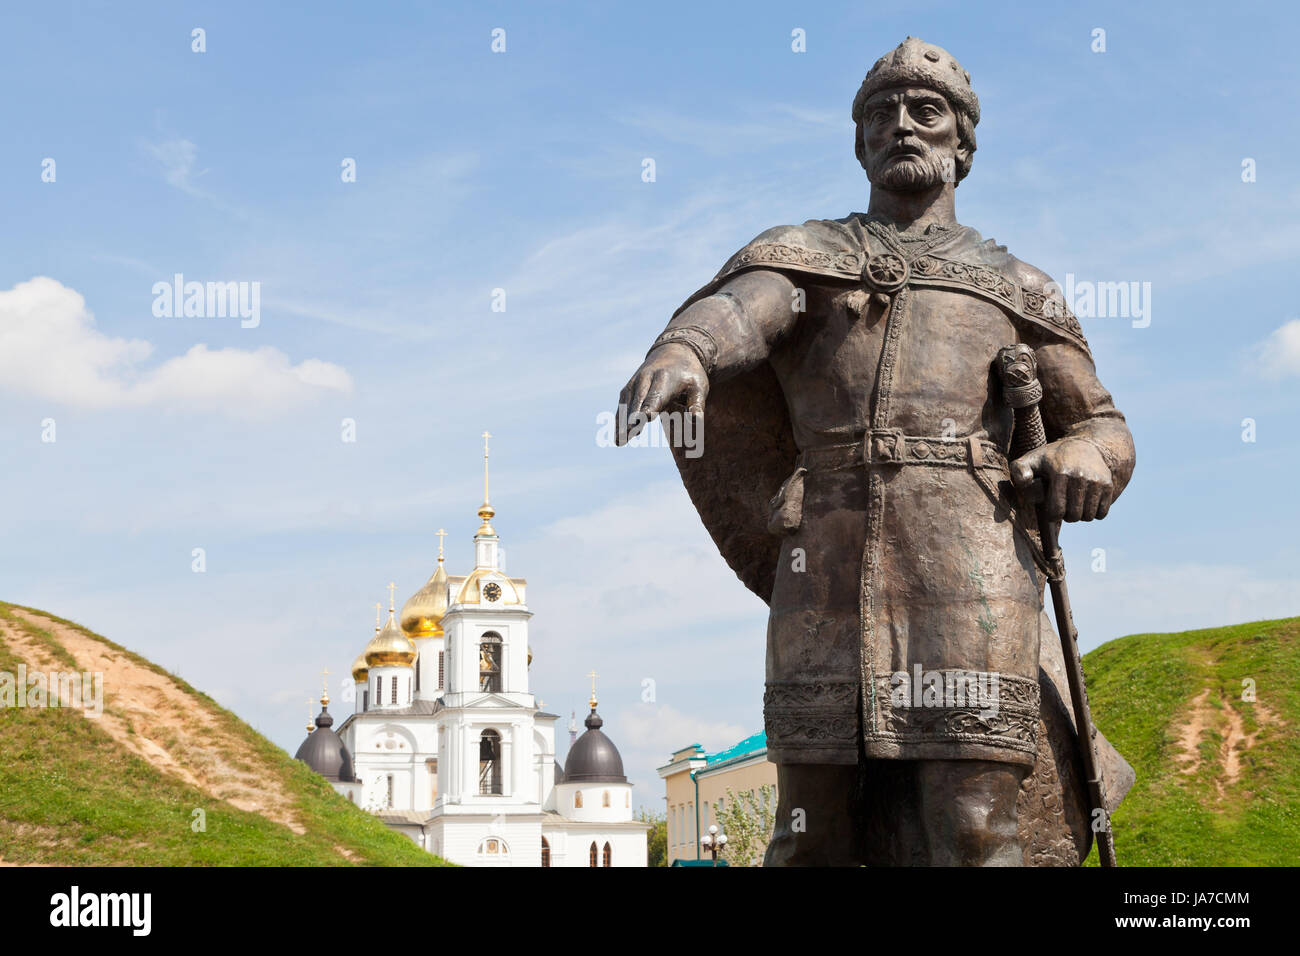 DMITROV, RUSSIA - AUGUST 14: Yury Dolgoruky Monument at southern entrance to Kremlin in Dmitrov, Russia on August 14, 2013. The statue was build in 2001 by sculptor Tserkovnikov. Stock Photo